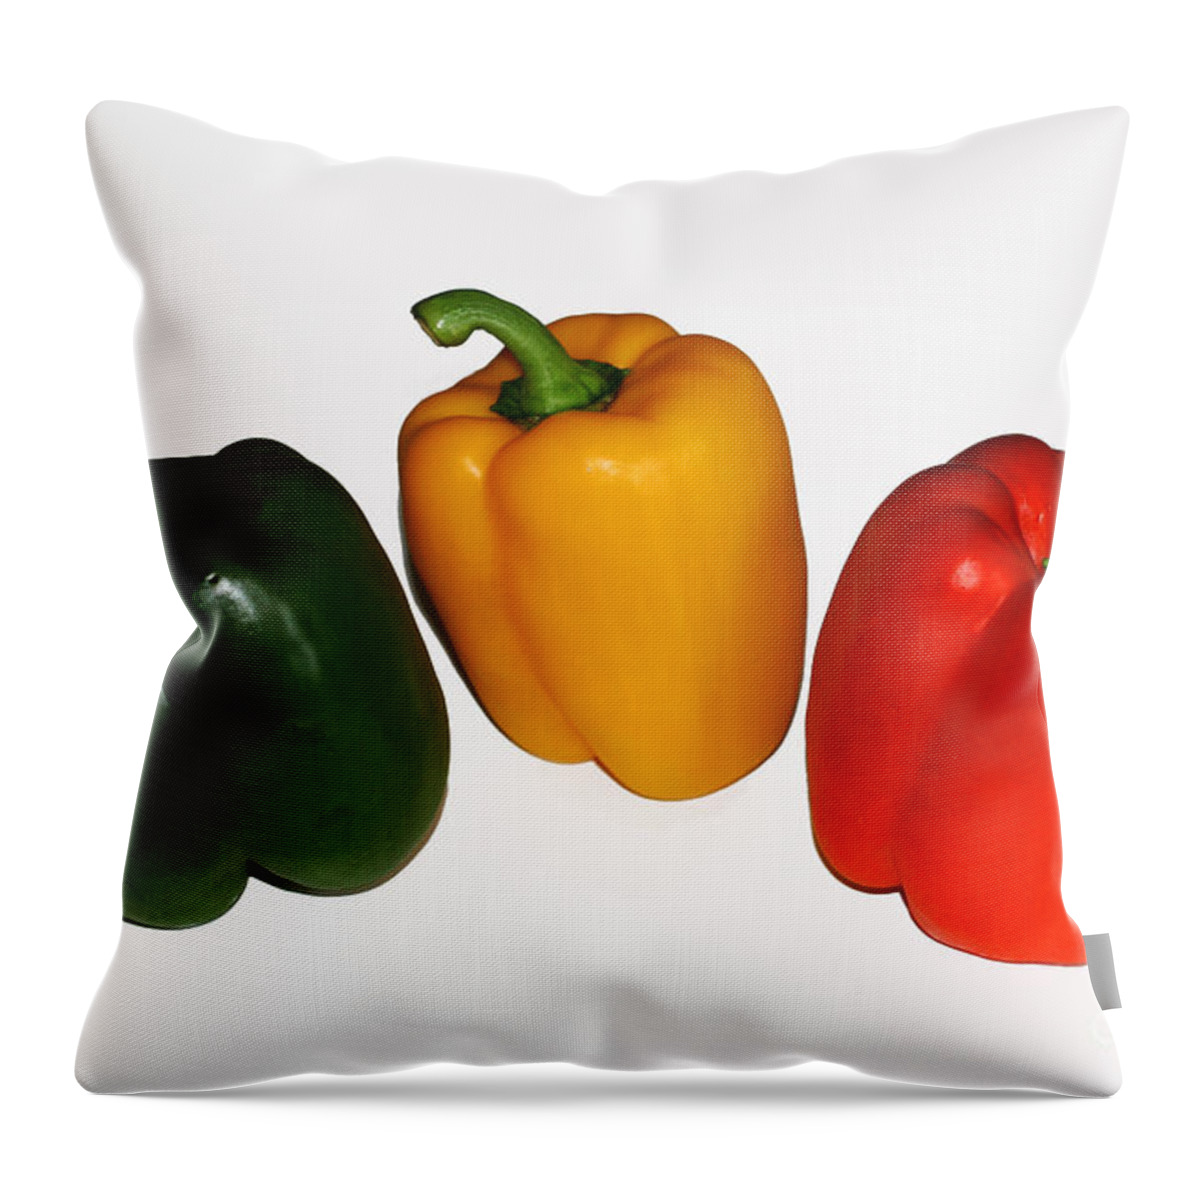 Pepper Throw Pillow featuring the photograph Three Bell Peppers by Barbara McMahon